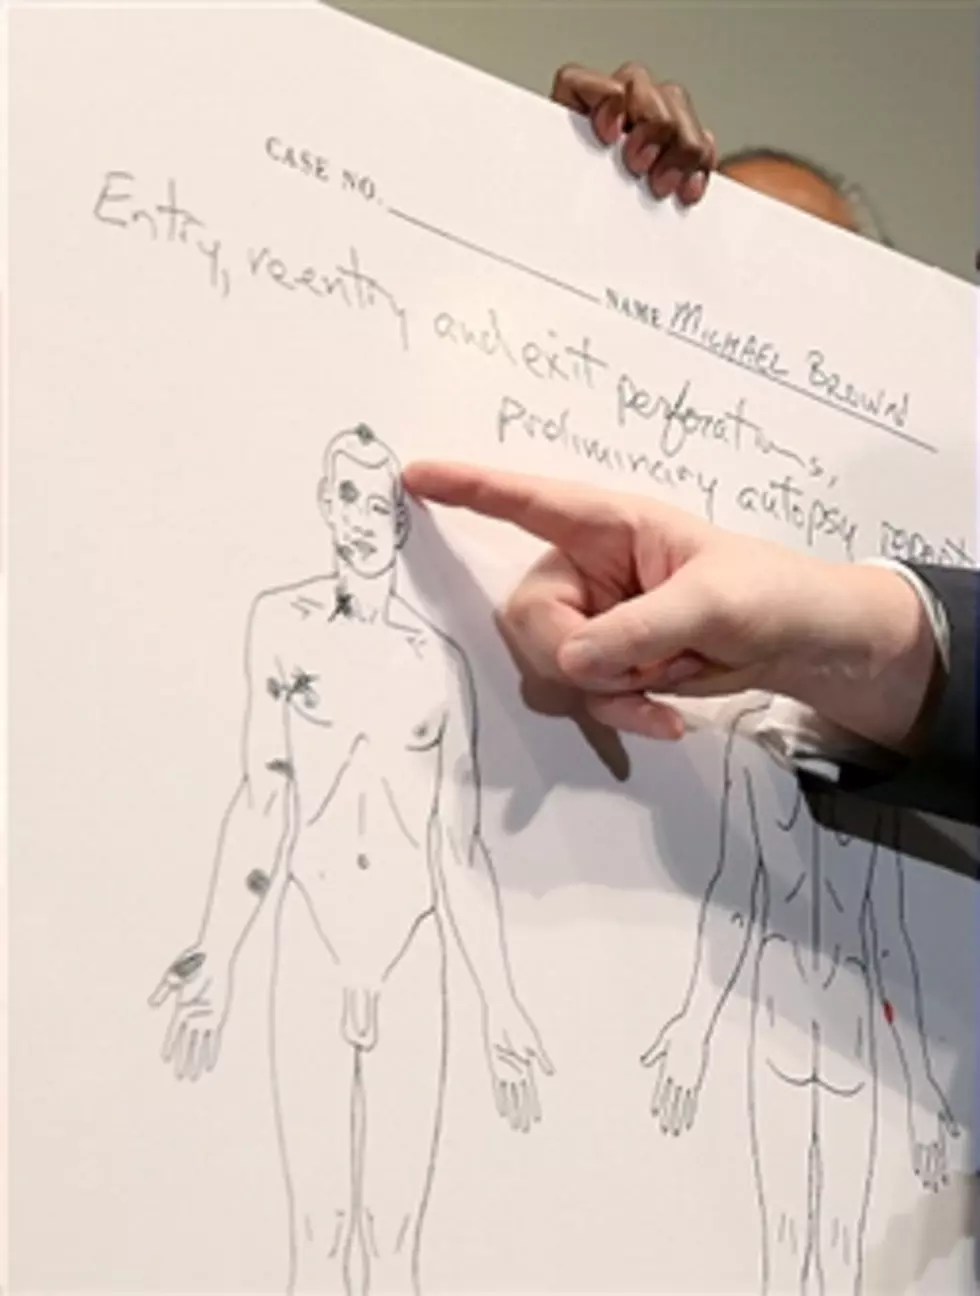 Autopsy Reveals Michael Brown Was Shot At Least 6 Times – Tha Wire [VIDEO]